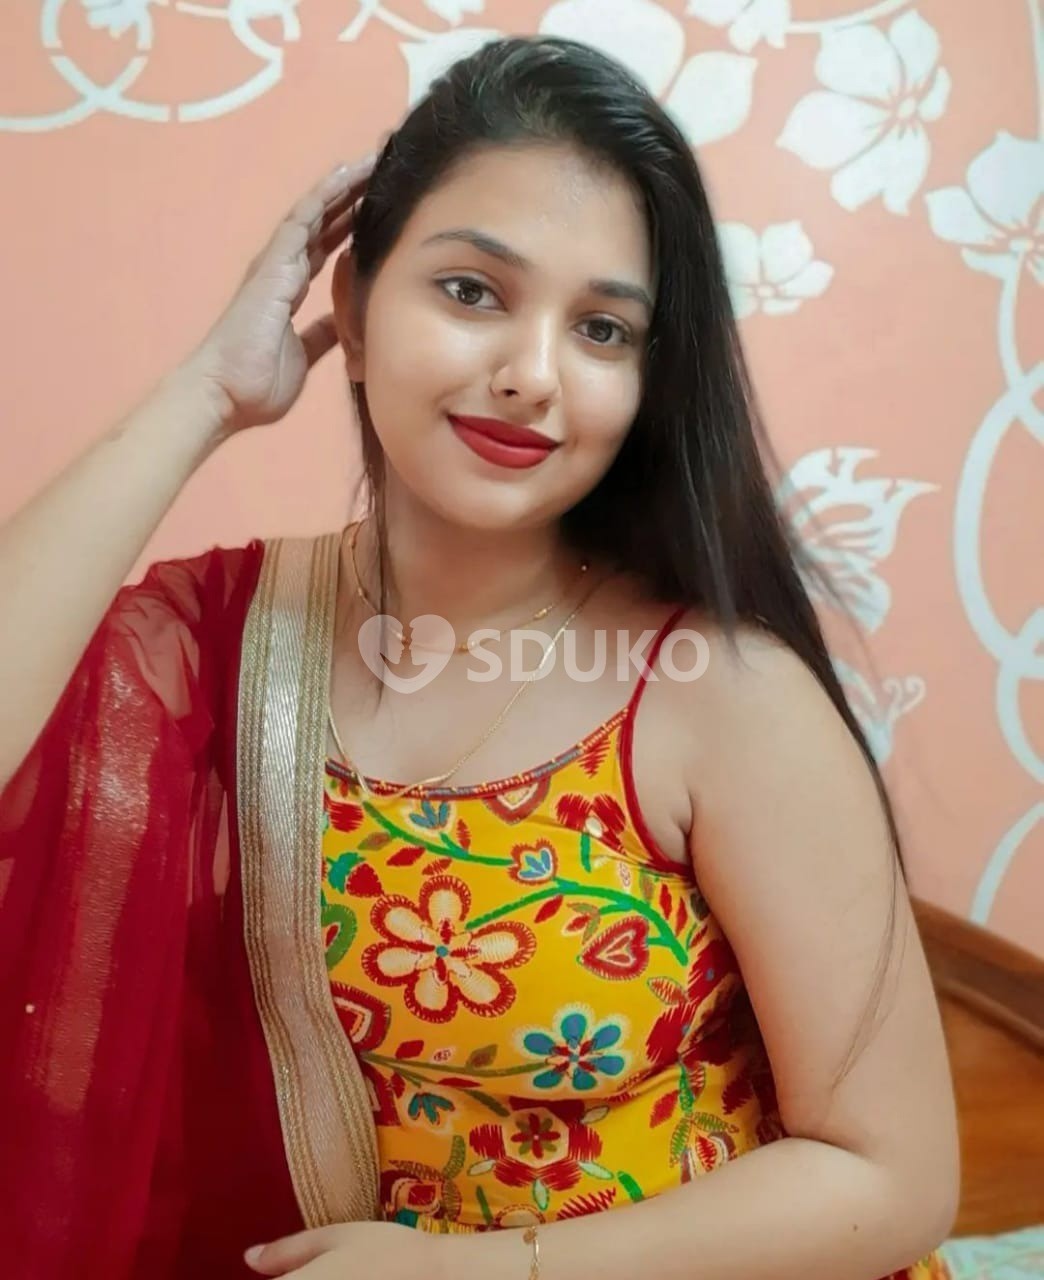 Dimapur 100% trusted 2000 unlimited shot high profile genuine girls available now